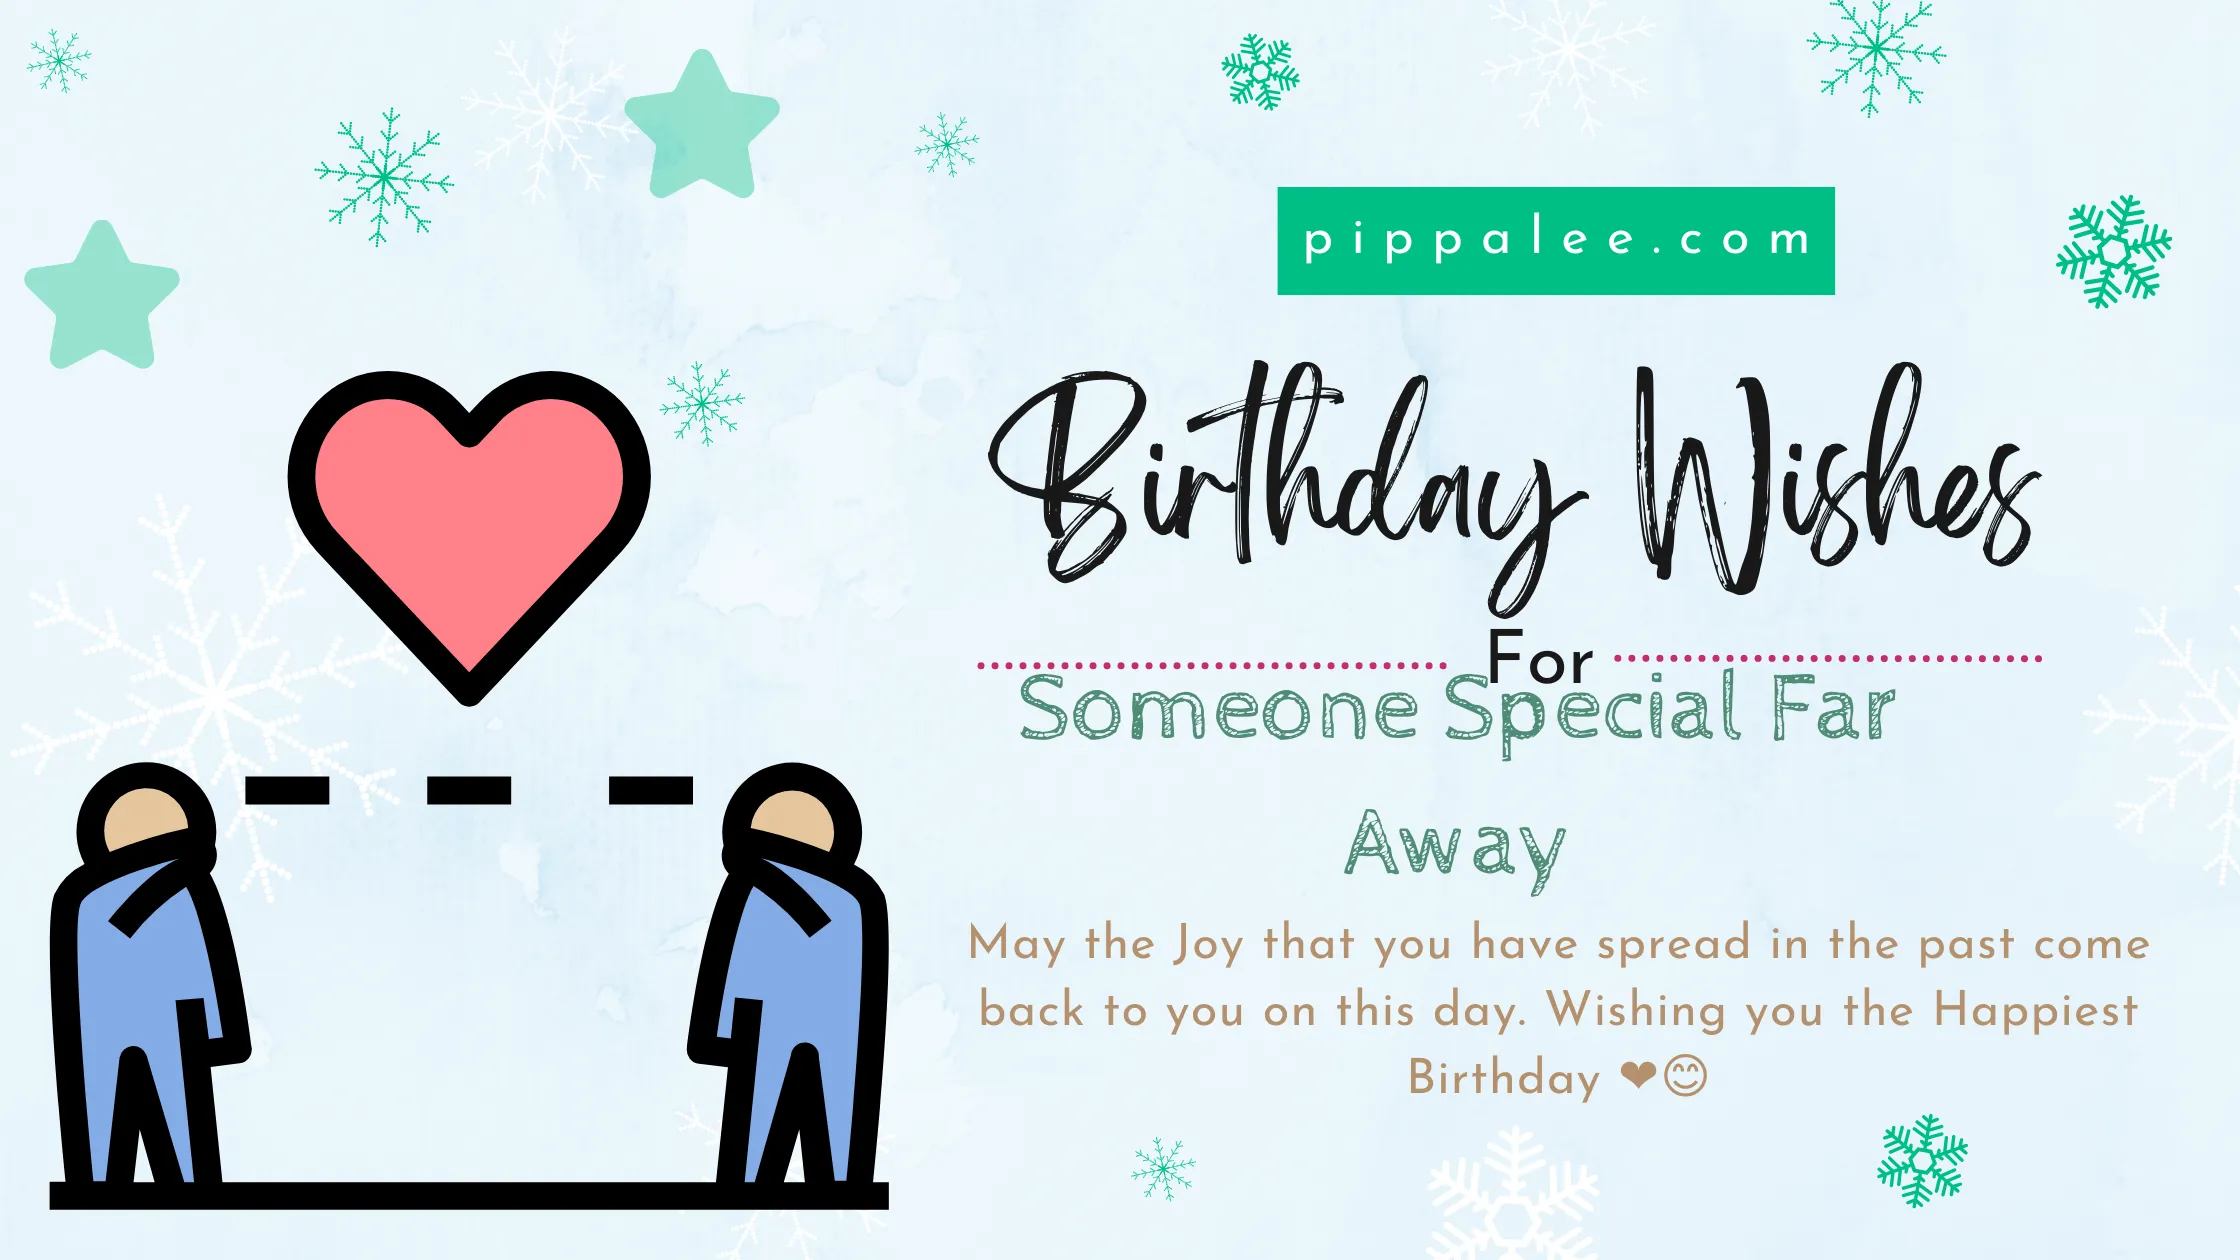 Birthday Wishes For Someone Special Far Away - Wishes & Messages